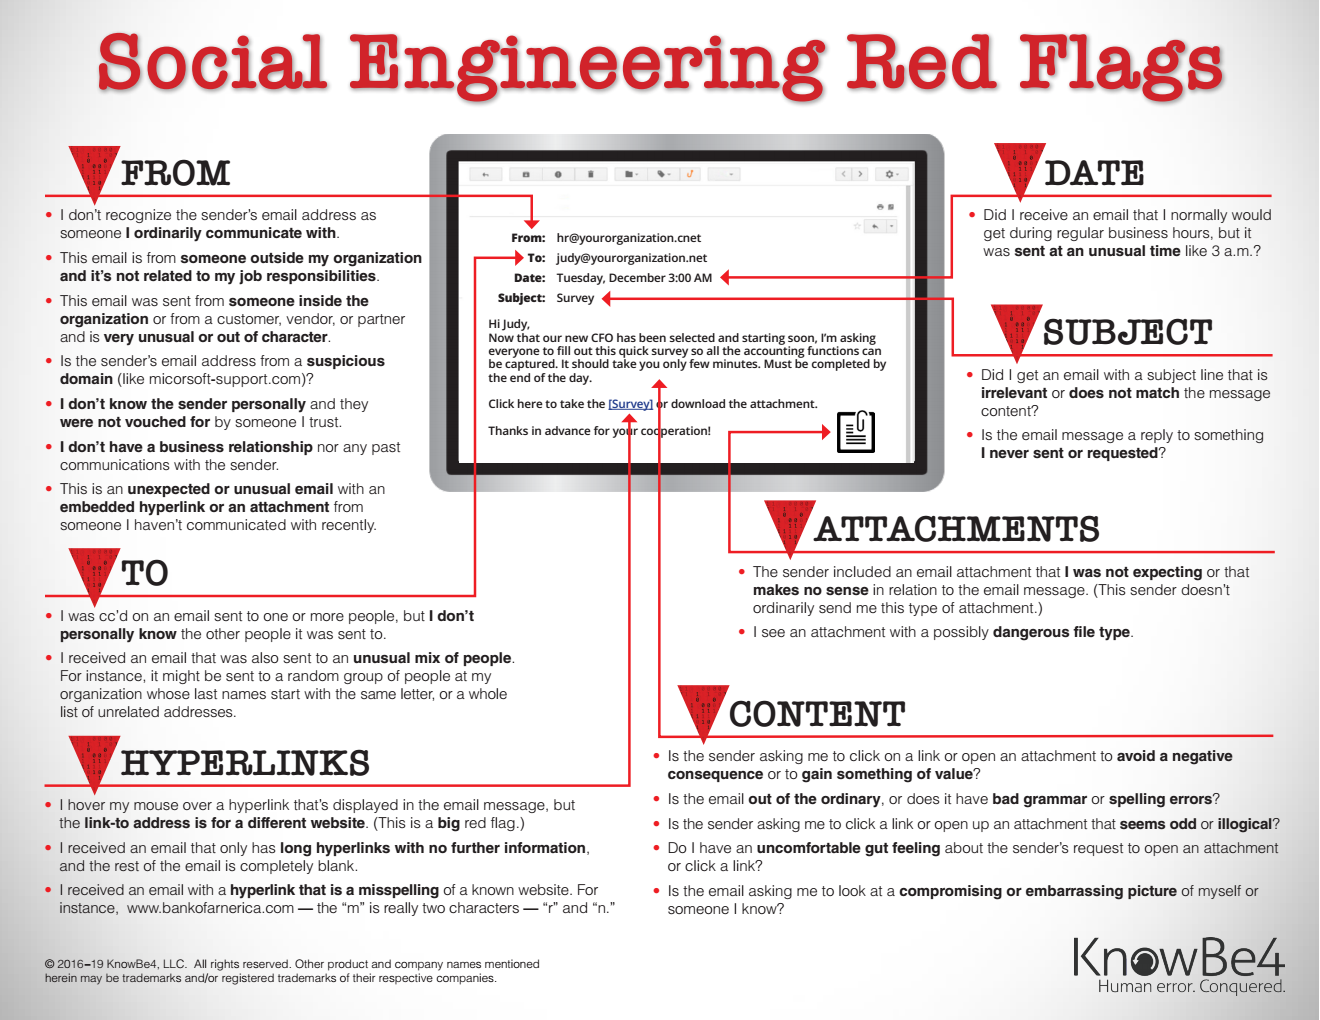 2019_22_Social_Engineering_Red_Flags.png